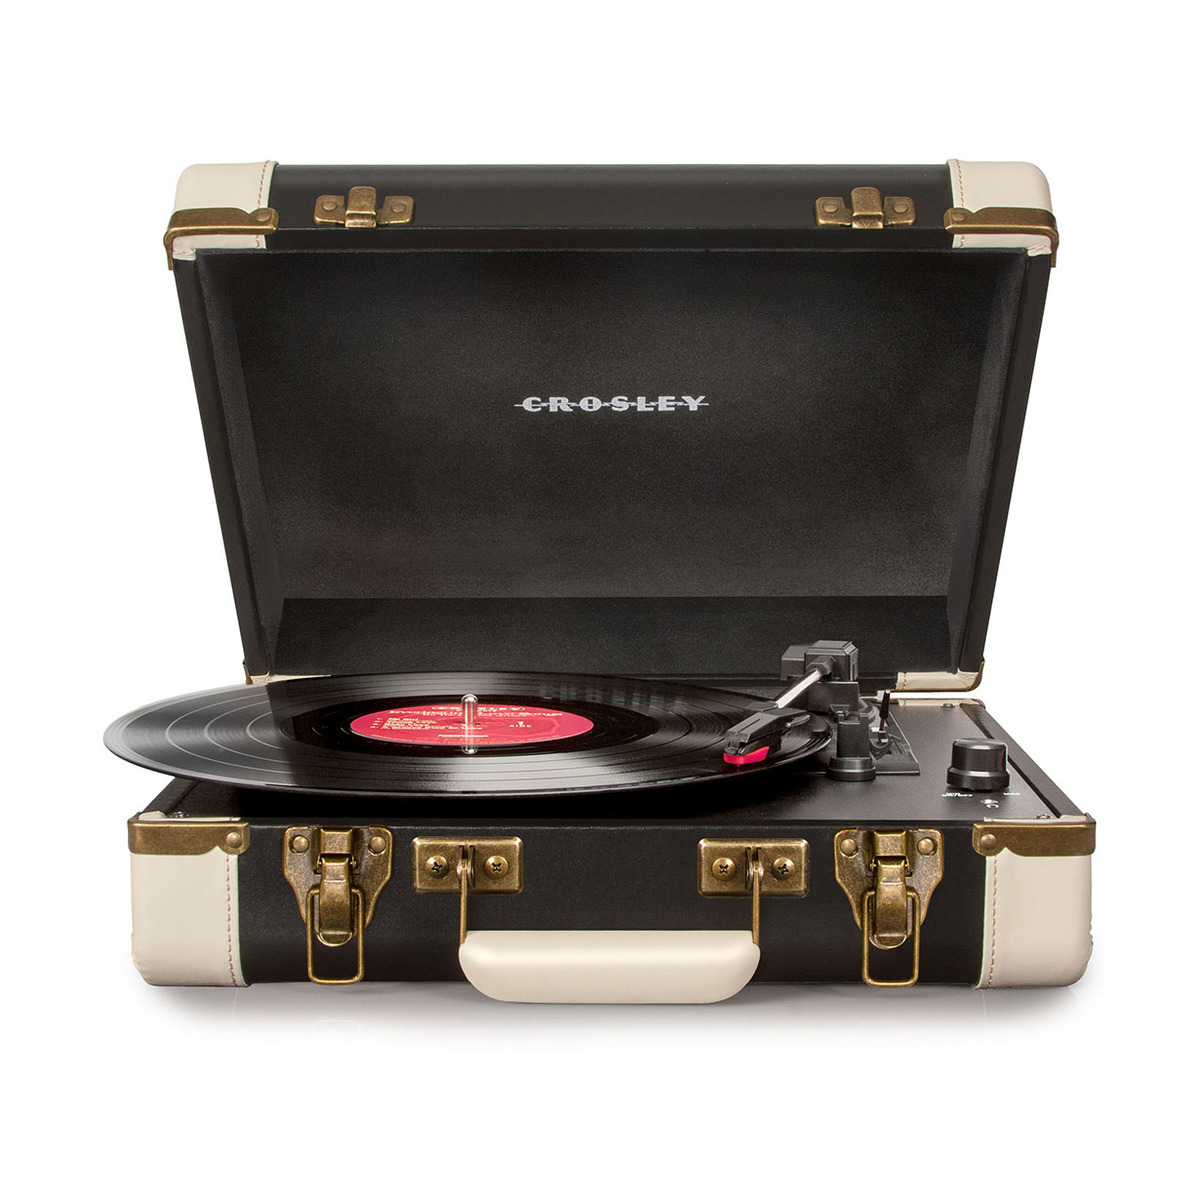 Crosley Executive Record Player from Turntable Kitchen's Best Turntables of 2022 list